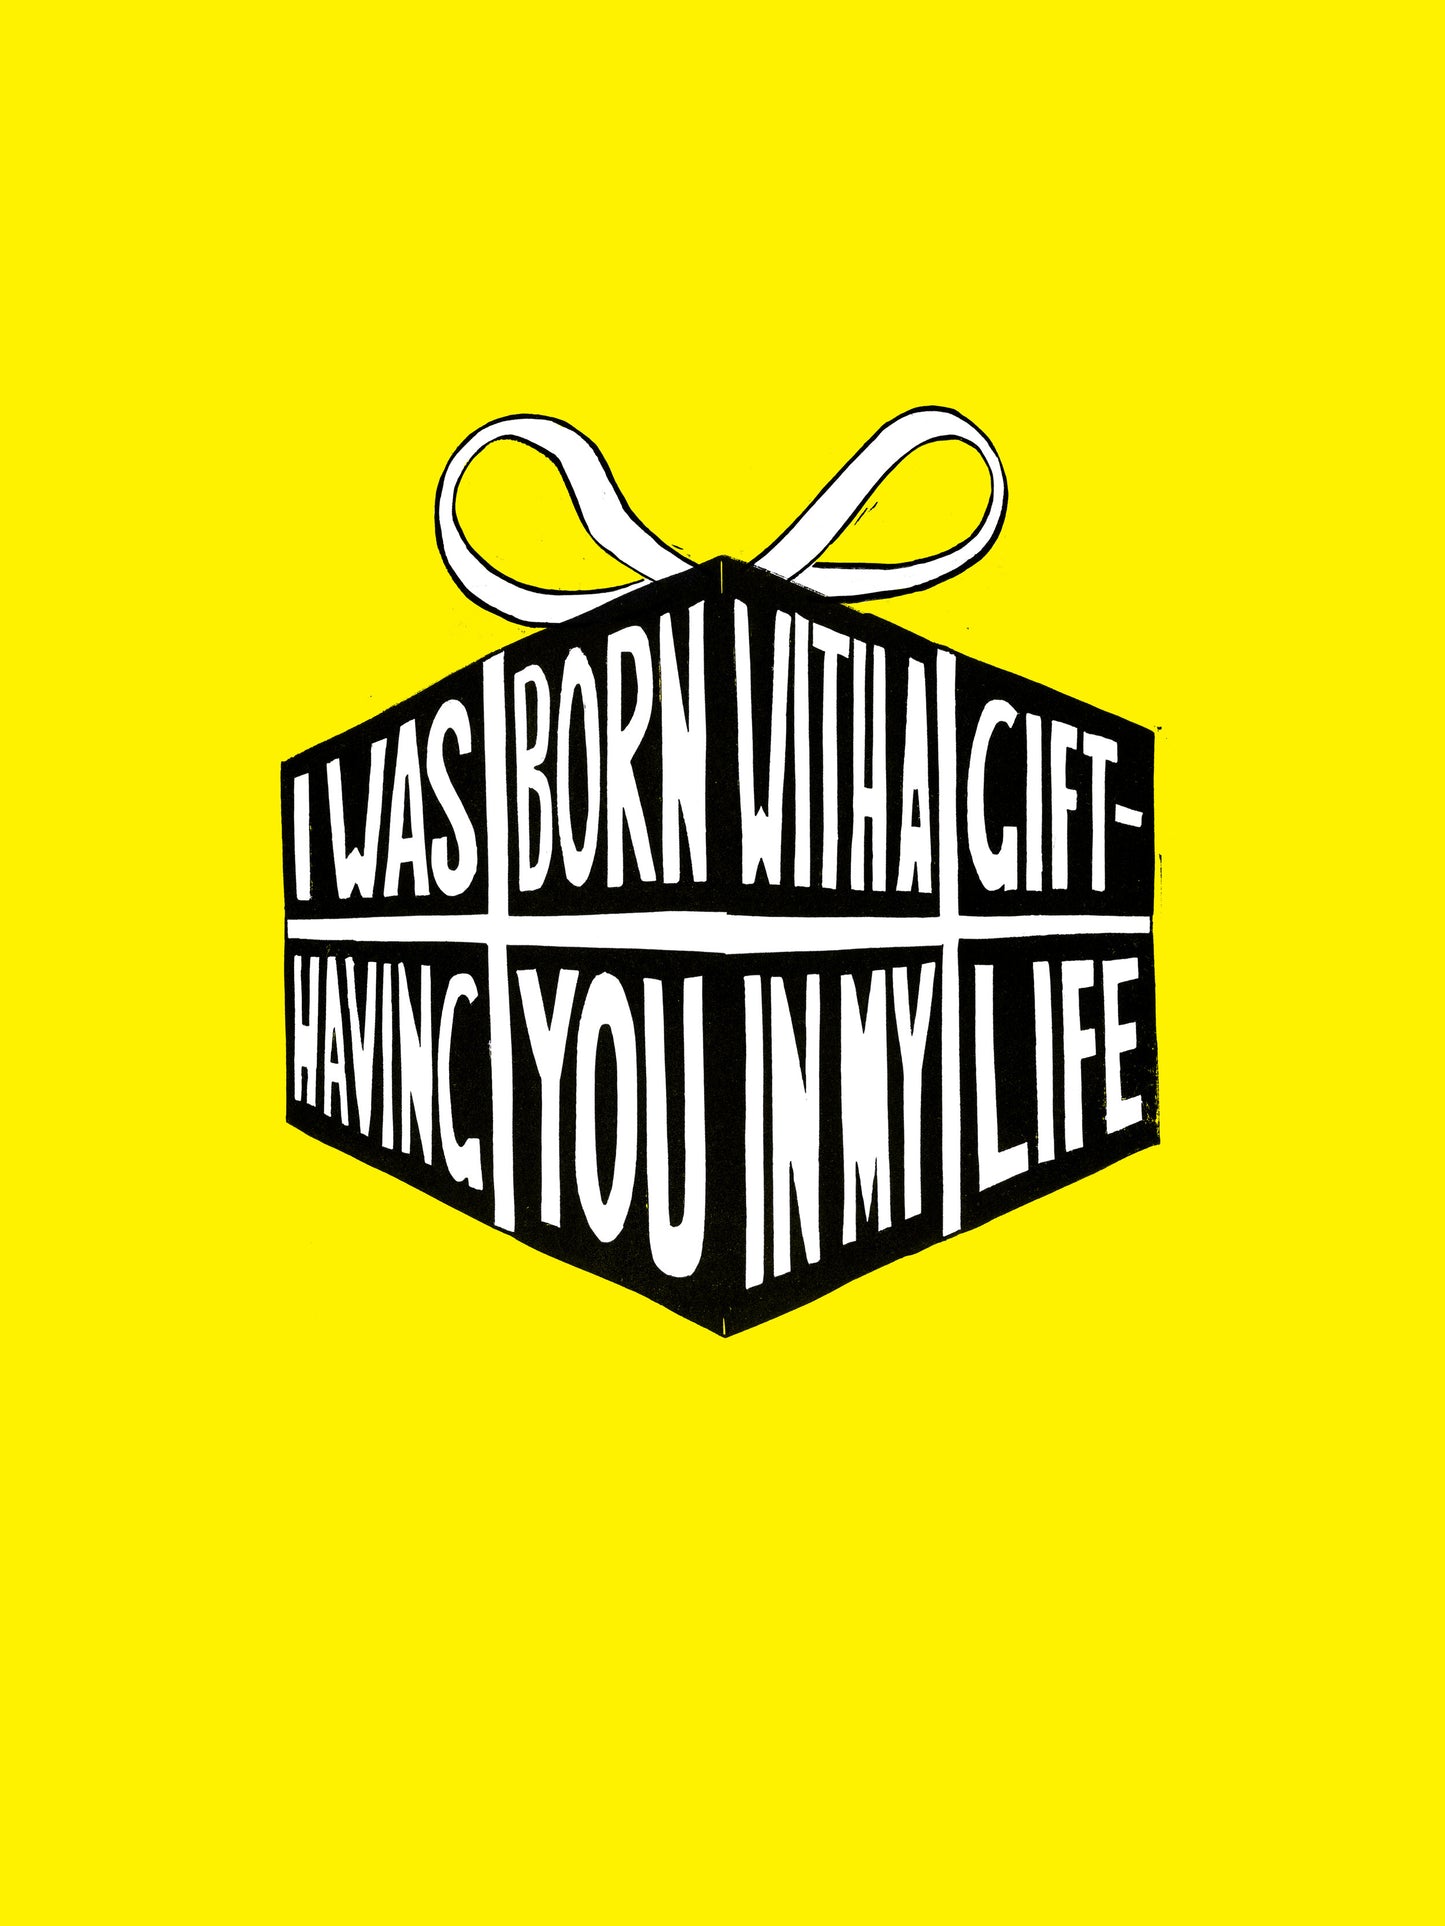 NEW! I Was Born With A Gift - Print